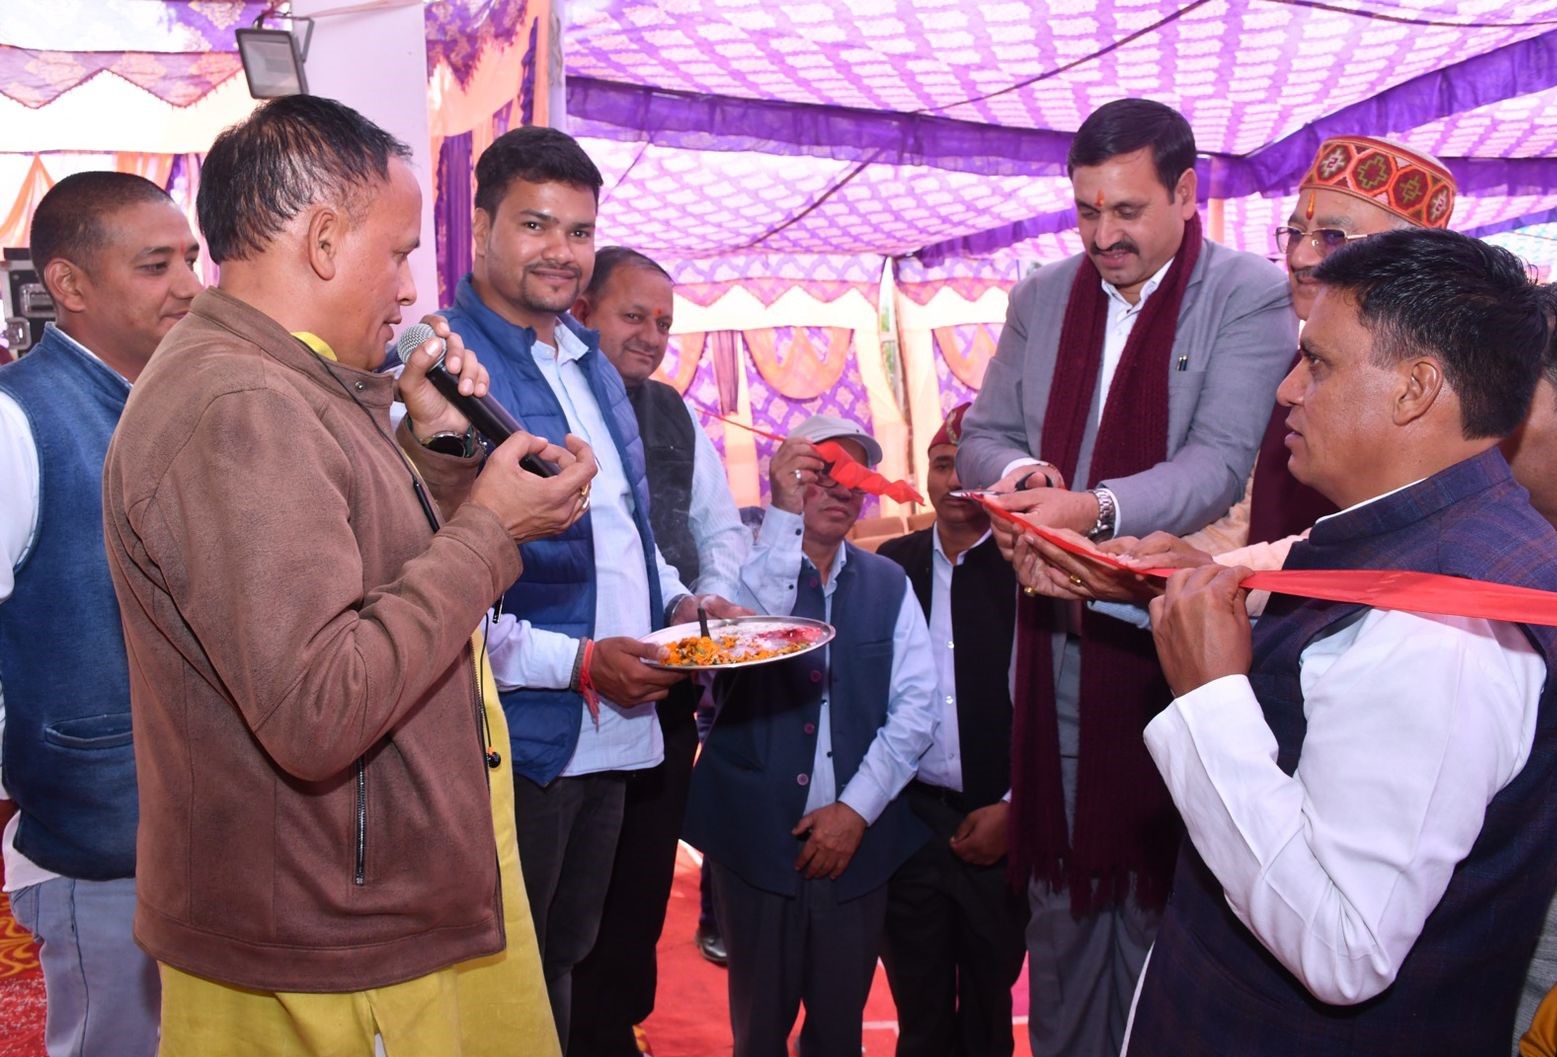 Jakholi tourism fair named after school children Fairs are indicative of our culture: Semwal